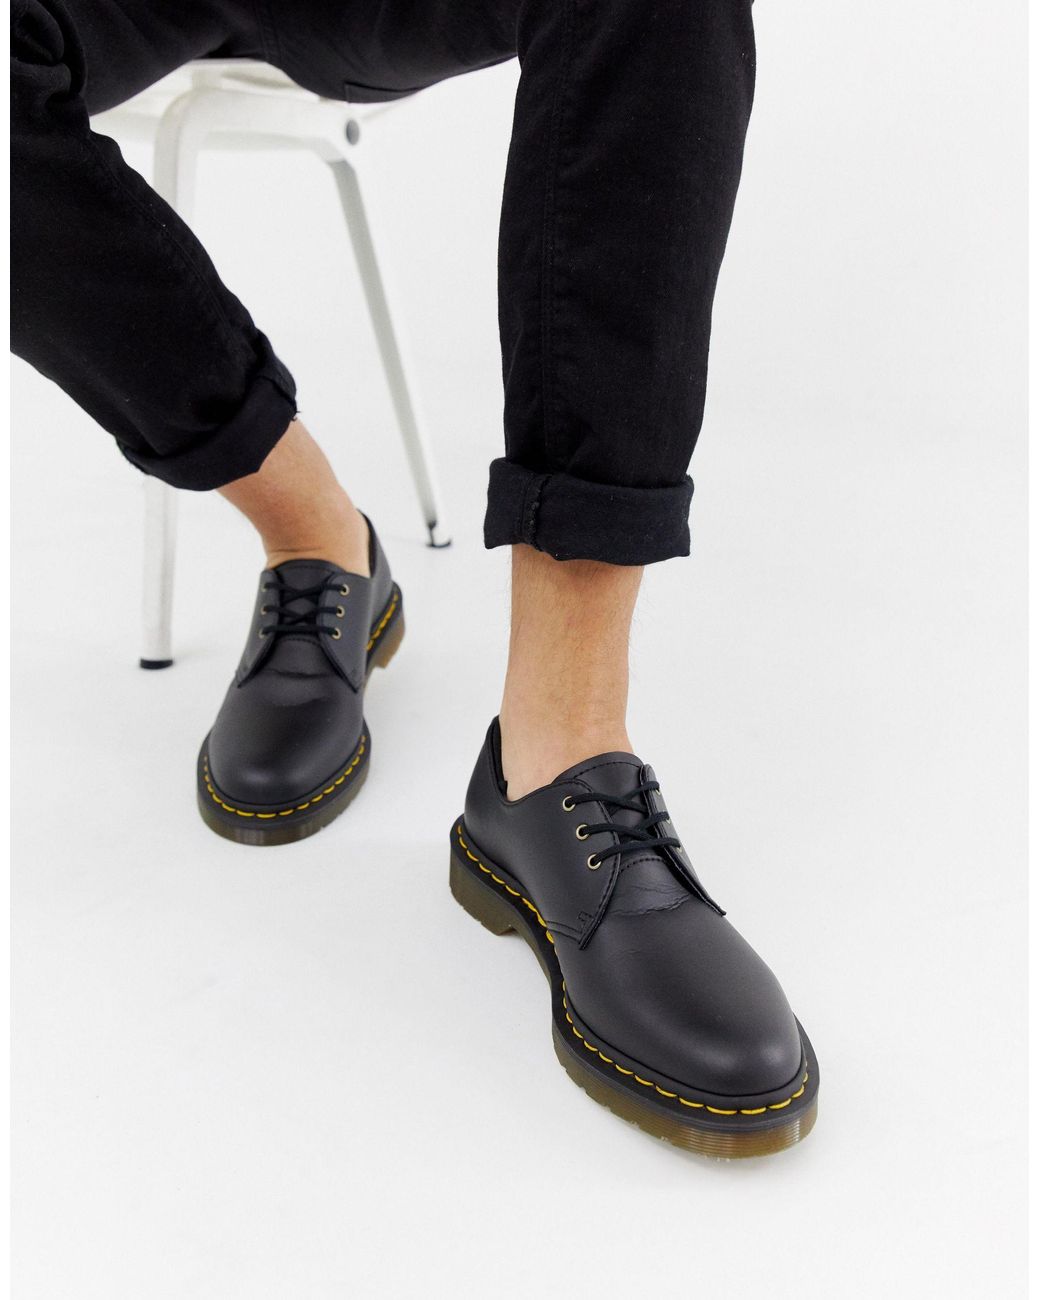 dr martens 1461 with jeans